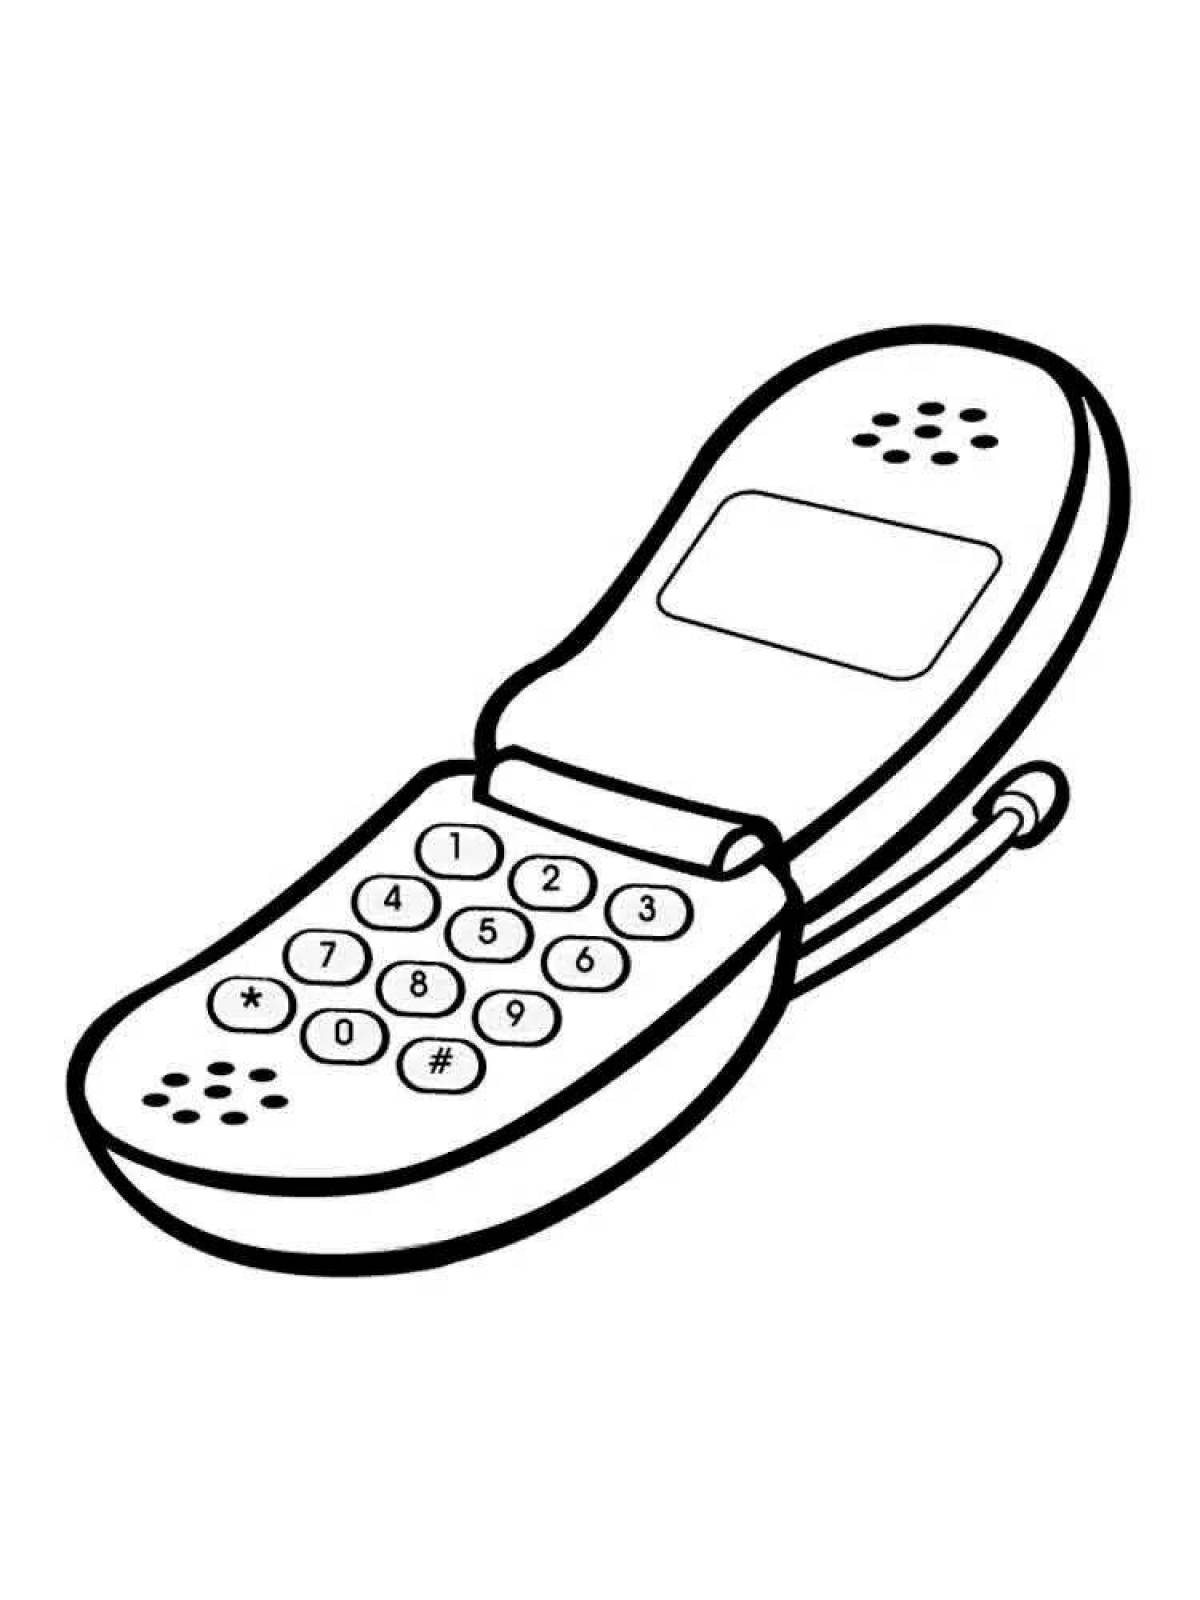 Playful phone coloring page